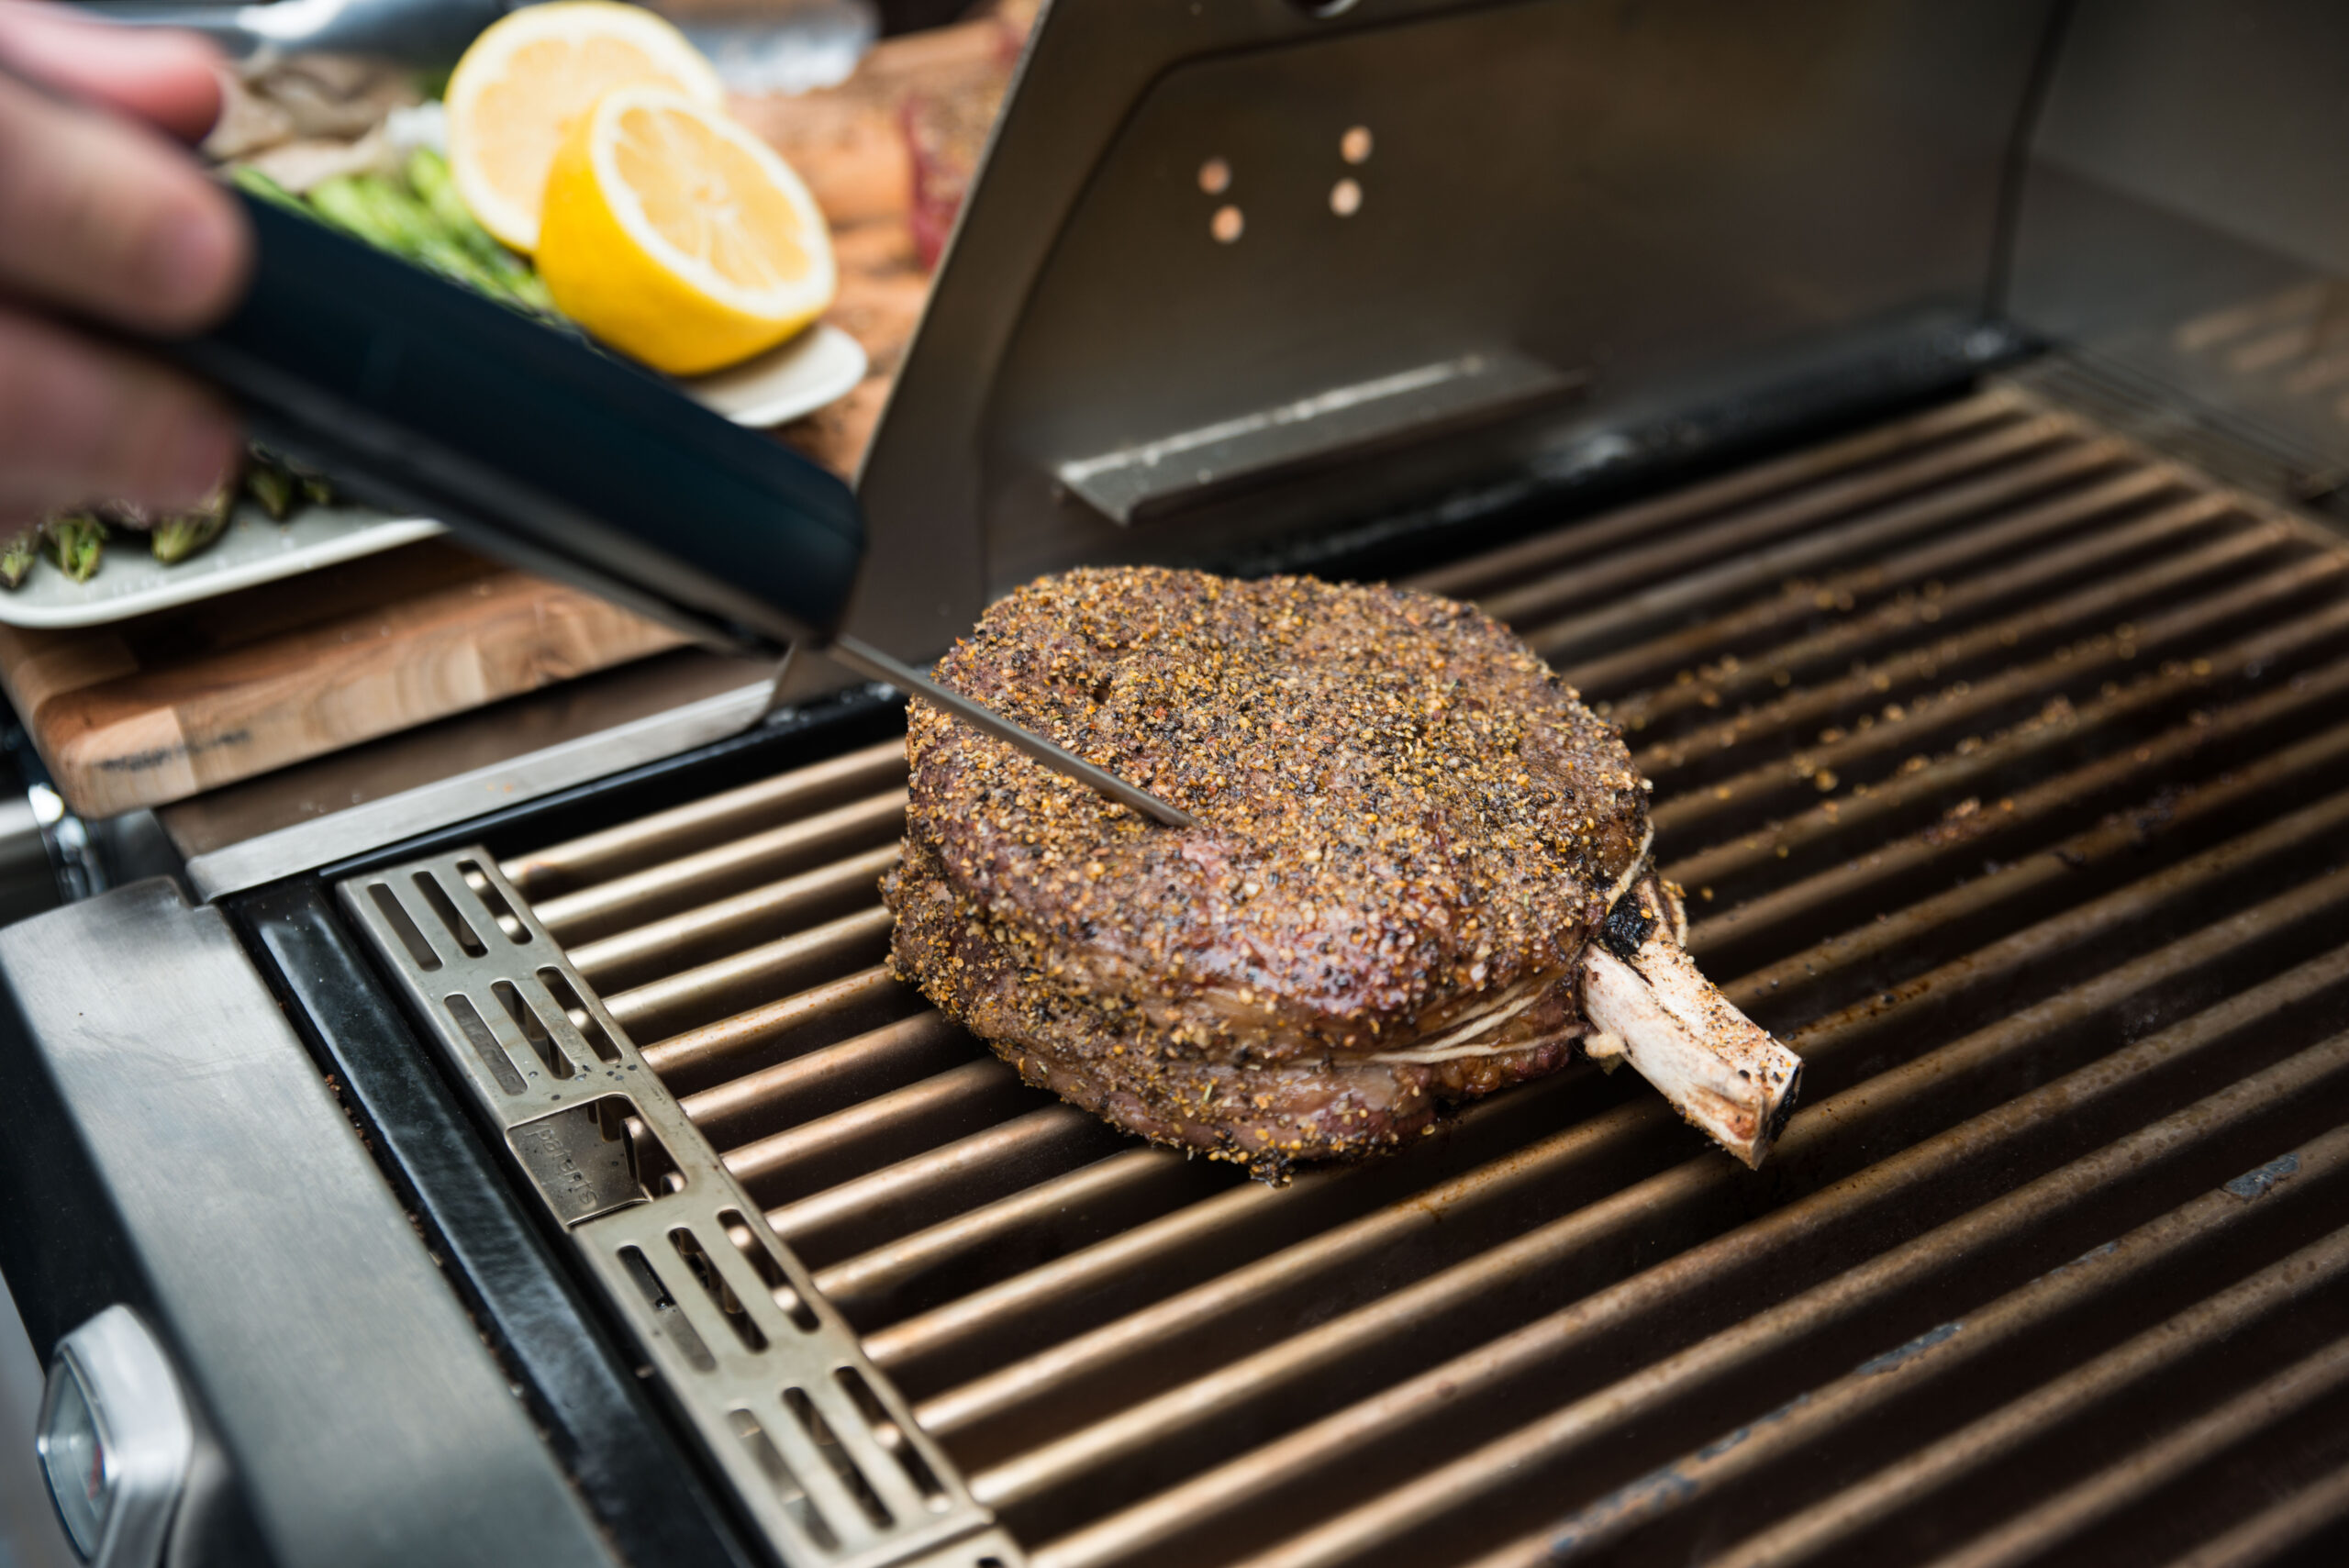 digital thermometer inserted into steak on grill